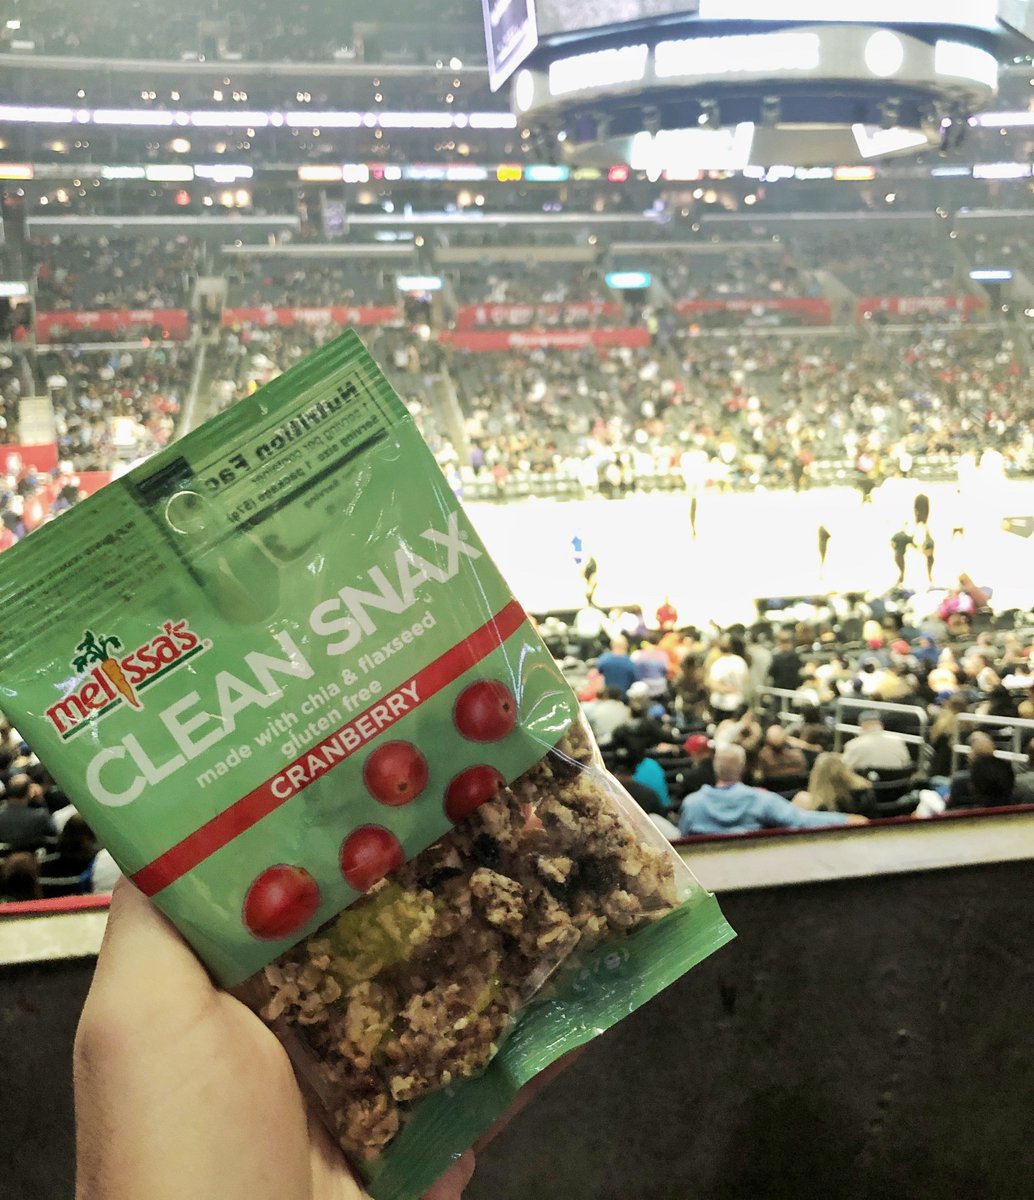 It's the final @LAClippers regular-season home game at @cryptocomarena! #ClipperNation, lets hear your favorite Clippers memory from the arena over the last 25 seasons (other than eating #CleanSnax!) 🏀🏟️ #MelissasProduce